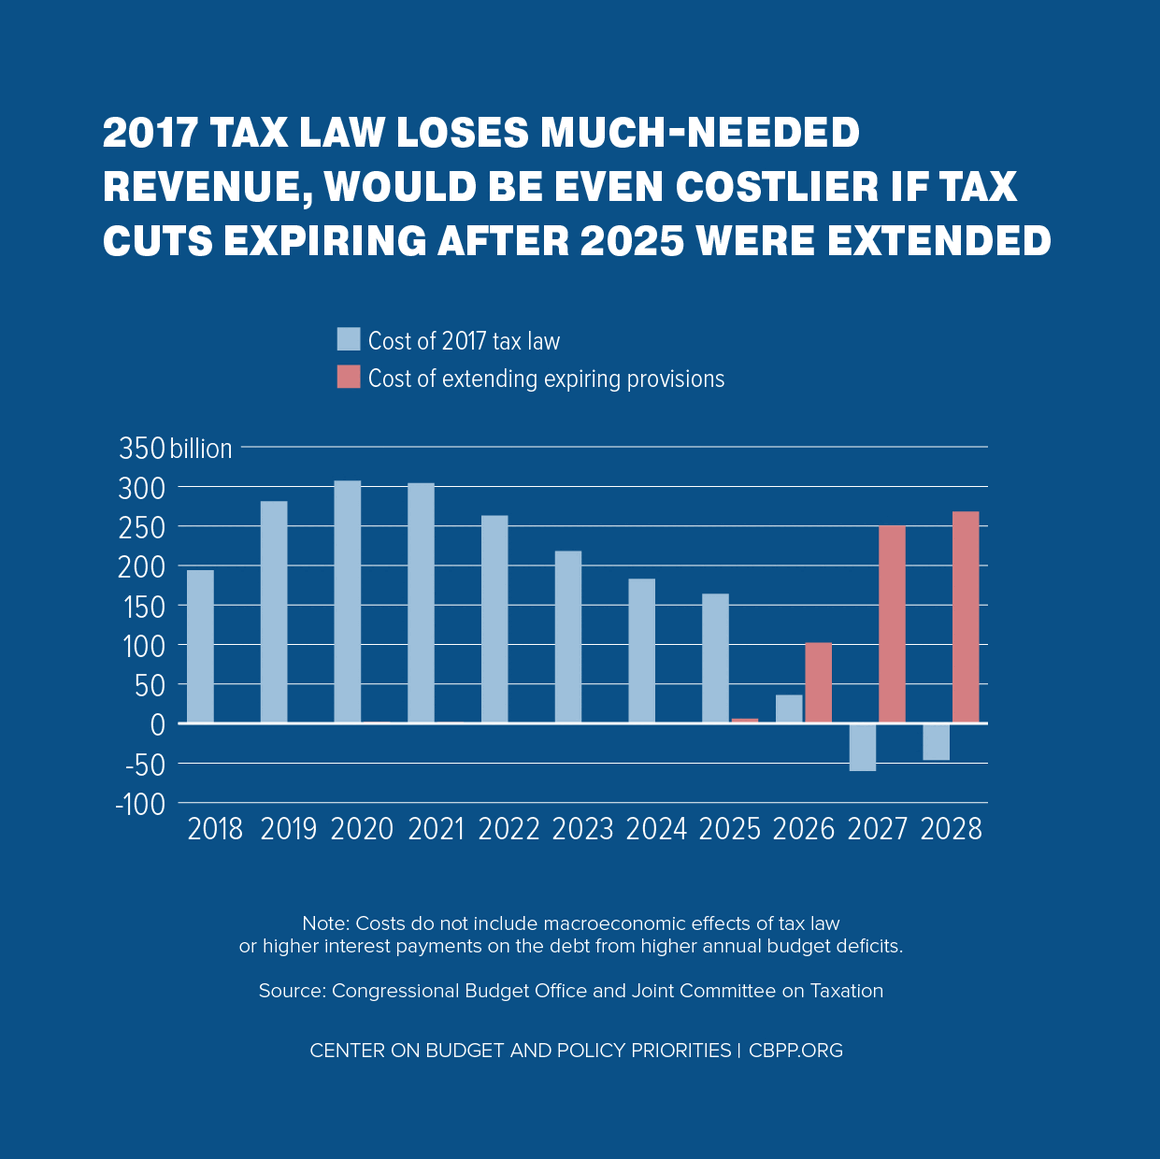 2017 Tax Law Loses Much-Needed Revenue, Would be Even Costlier if Tax Cuts Expiring After 2025 Were Extended